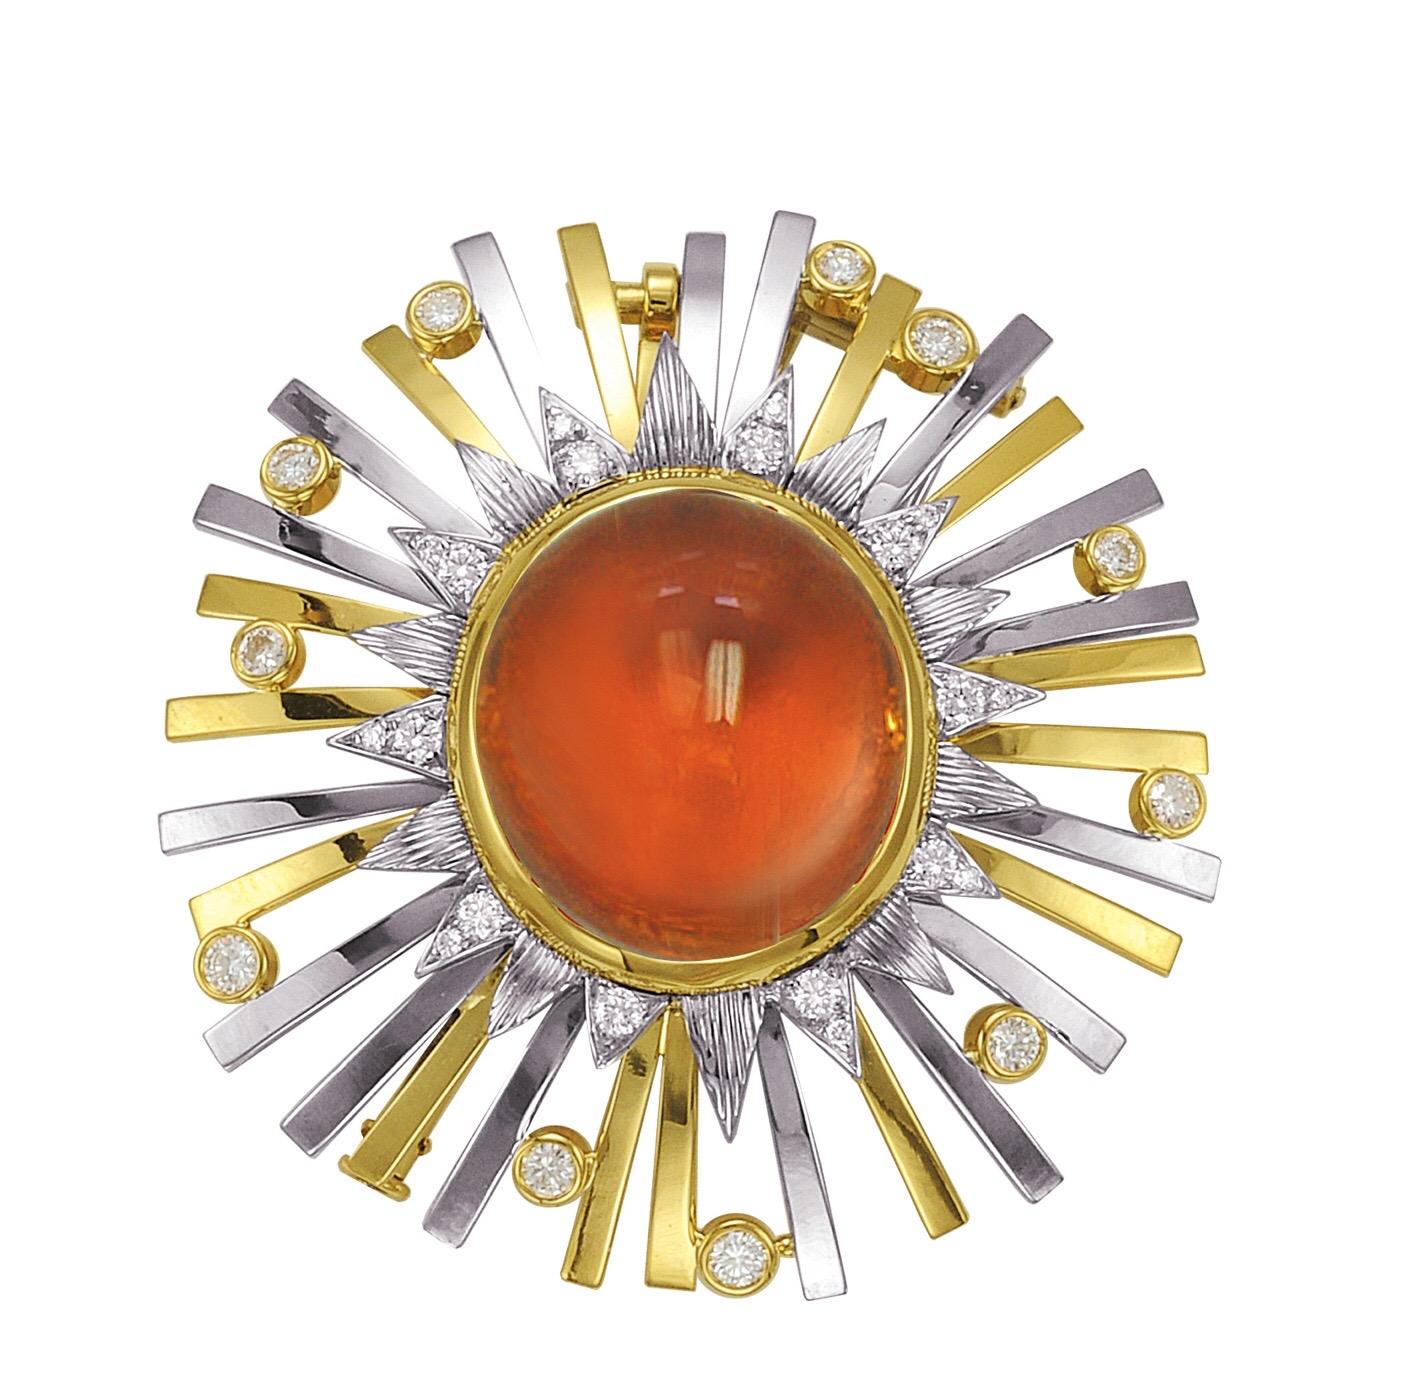 Madeira Citrine Cabochon 24.14 Carat Pendant Necklace Brooch For Sale 14